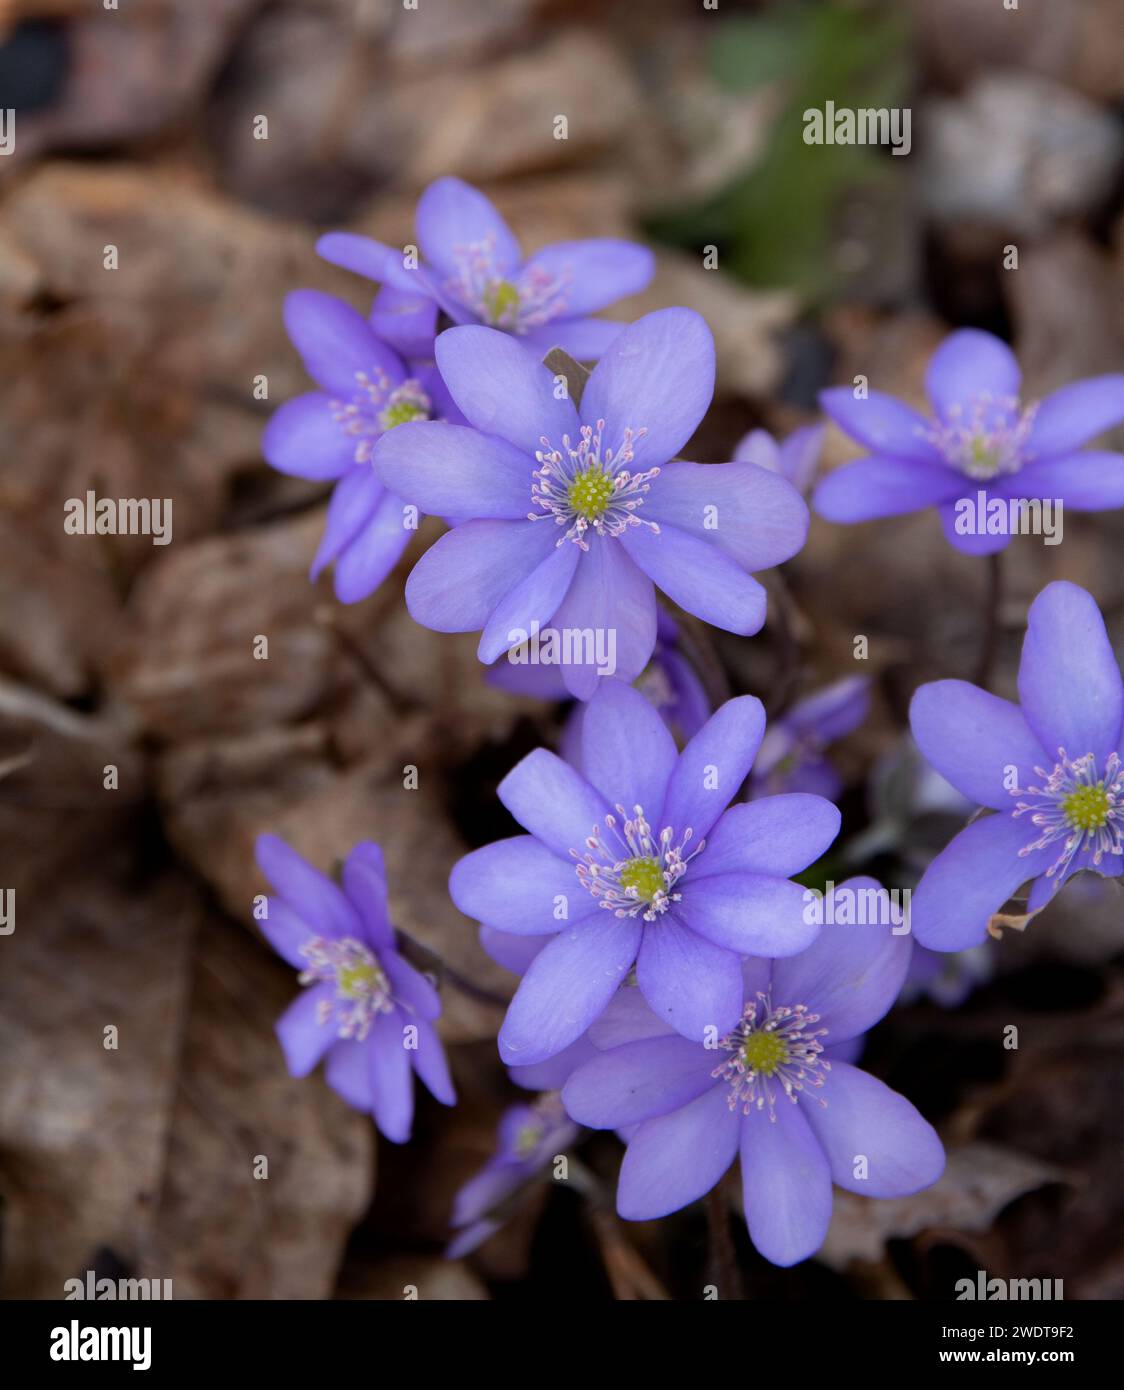 flowering plant, uncultivated, nature, springtime, plant, blue, blossom, liverwort, outdoor, forest, photography, no people, close-up, spring, hepatic Stock Photo